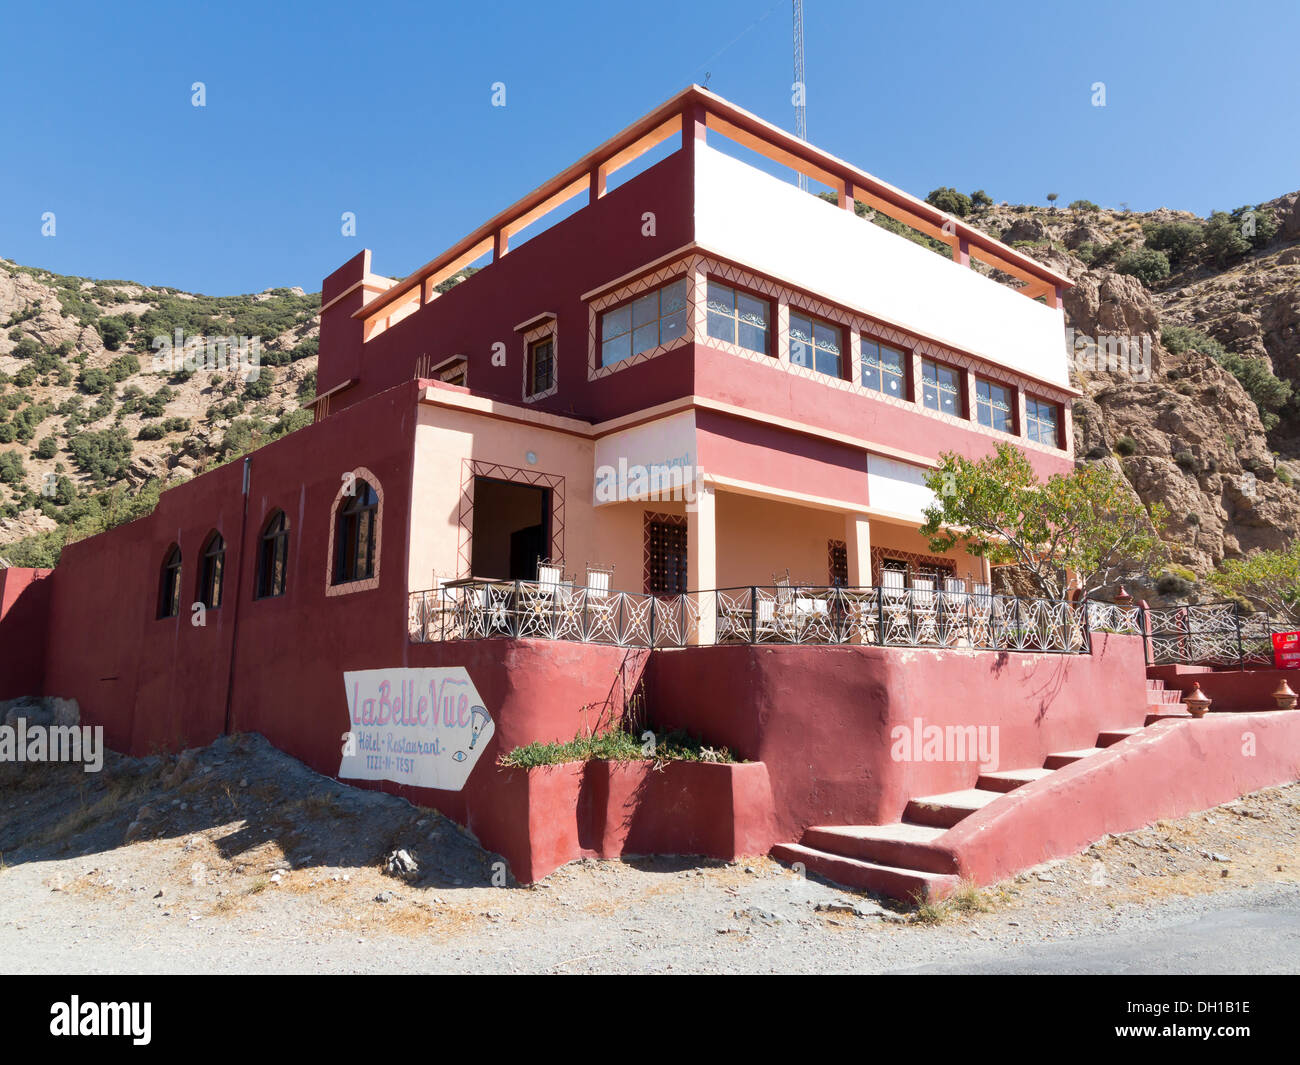 Cafe on the winding road over the Tizi n' Test pass Morocco, North Africa Stock Photo